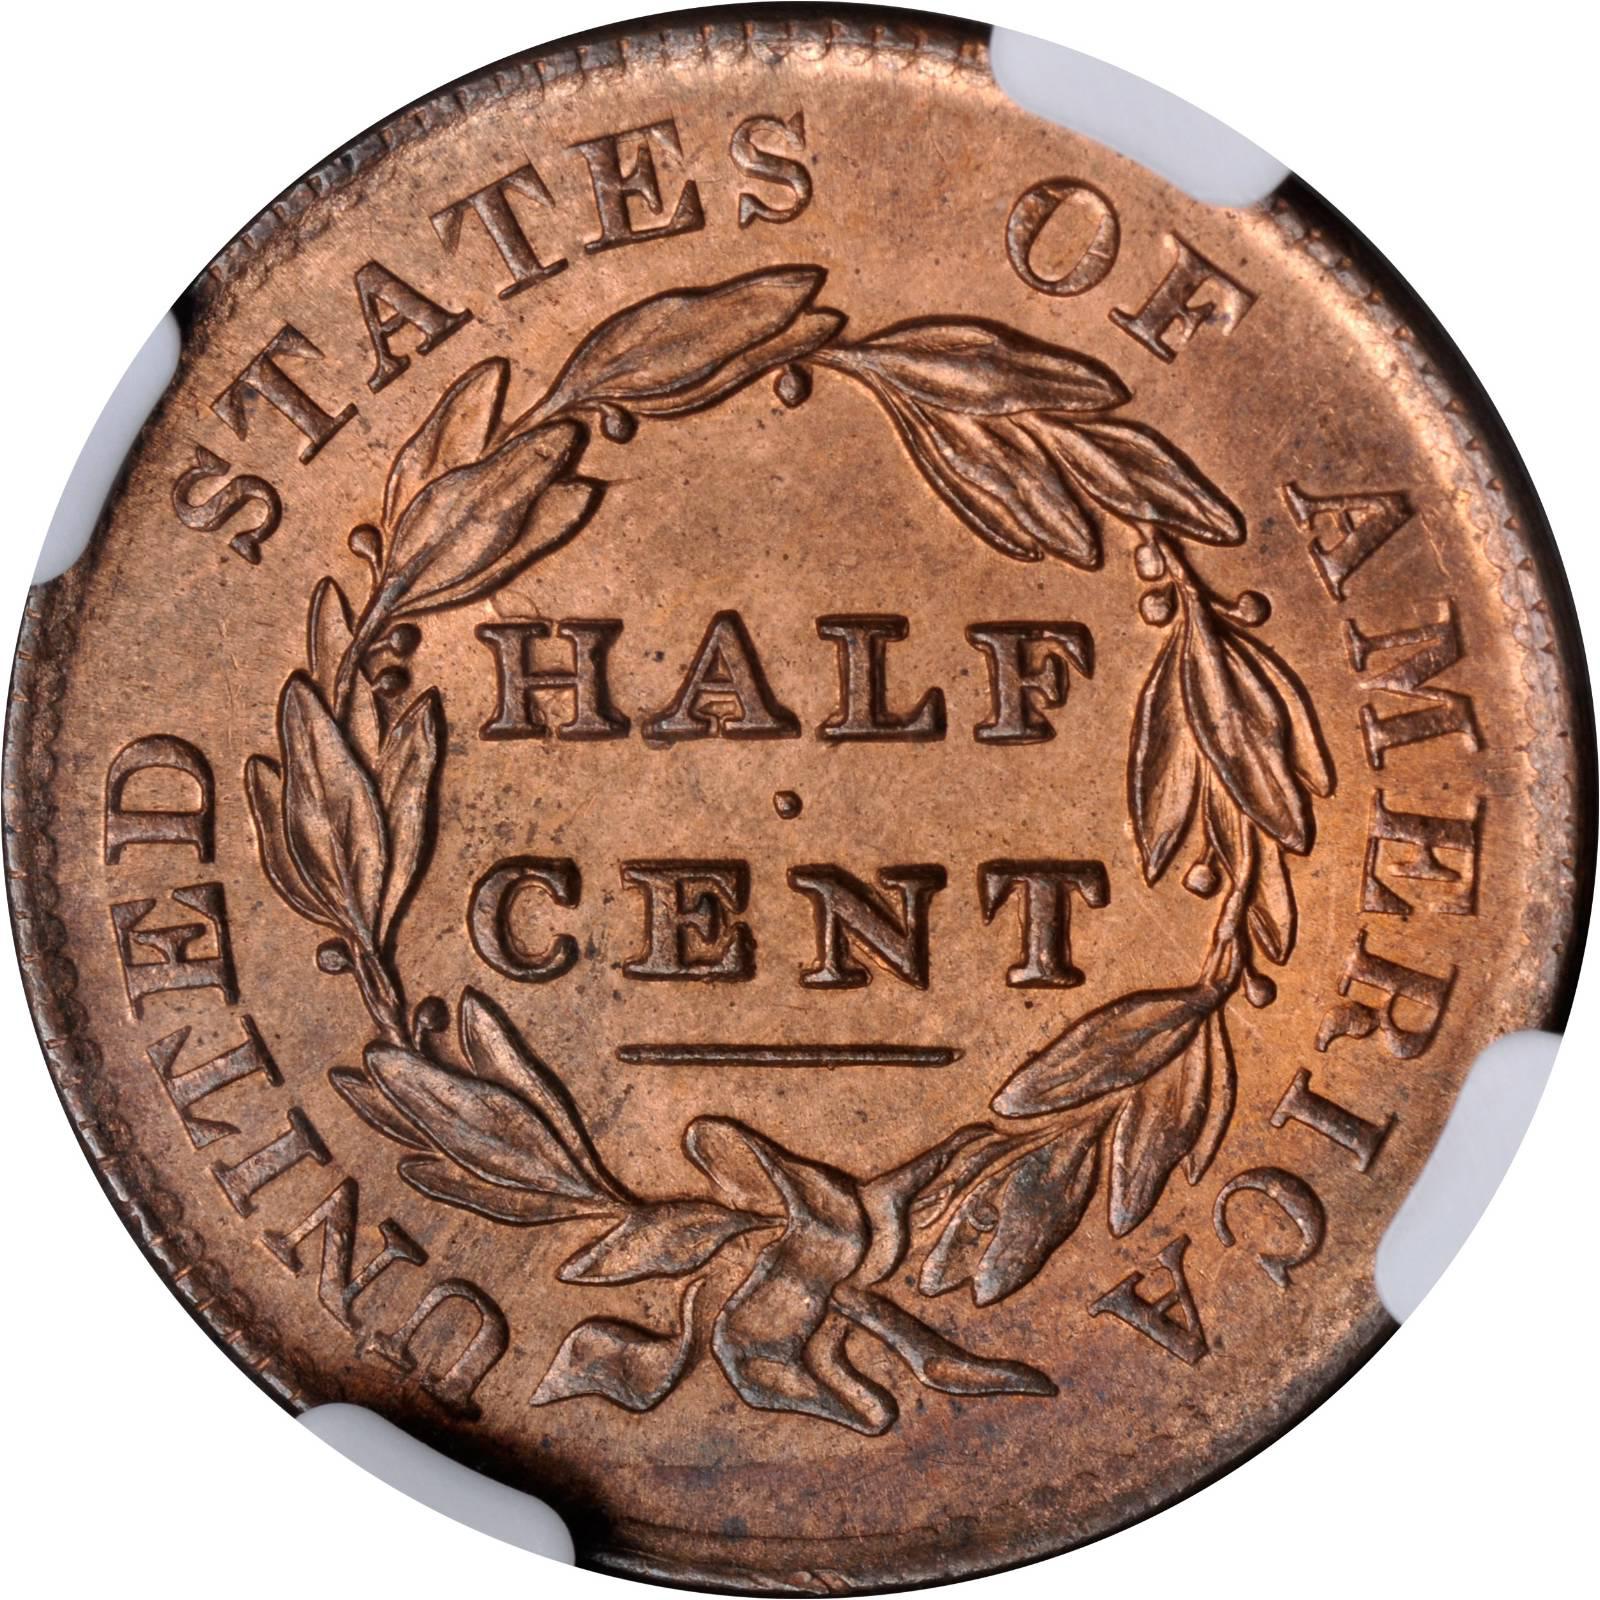 Details about   1828 Half Cent 13 Stars VF Uncertified 